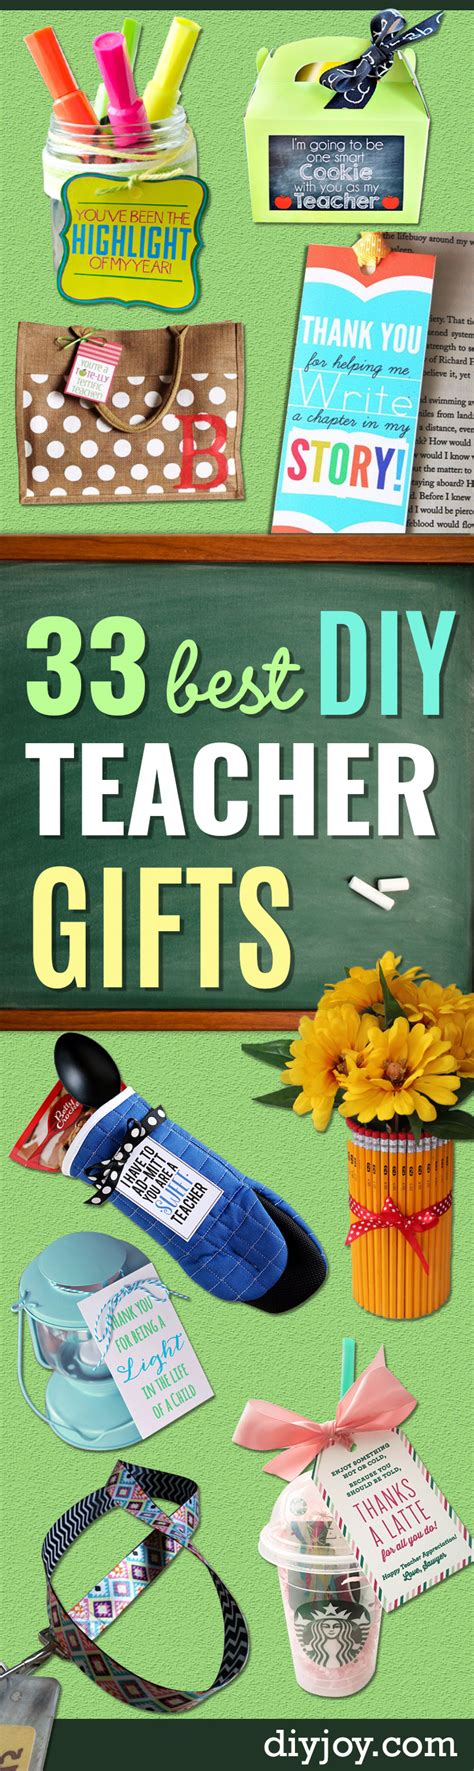 Christmas is coming around the corner, are you looking for the cute, easy christmas gifts for teachers? 33 Best DIY Teacher Gifts